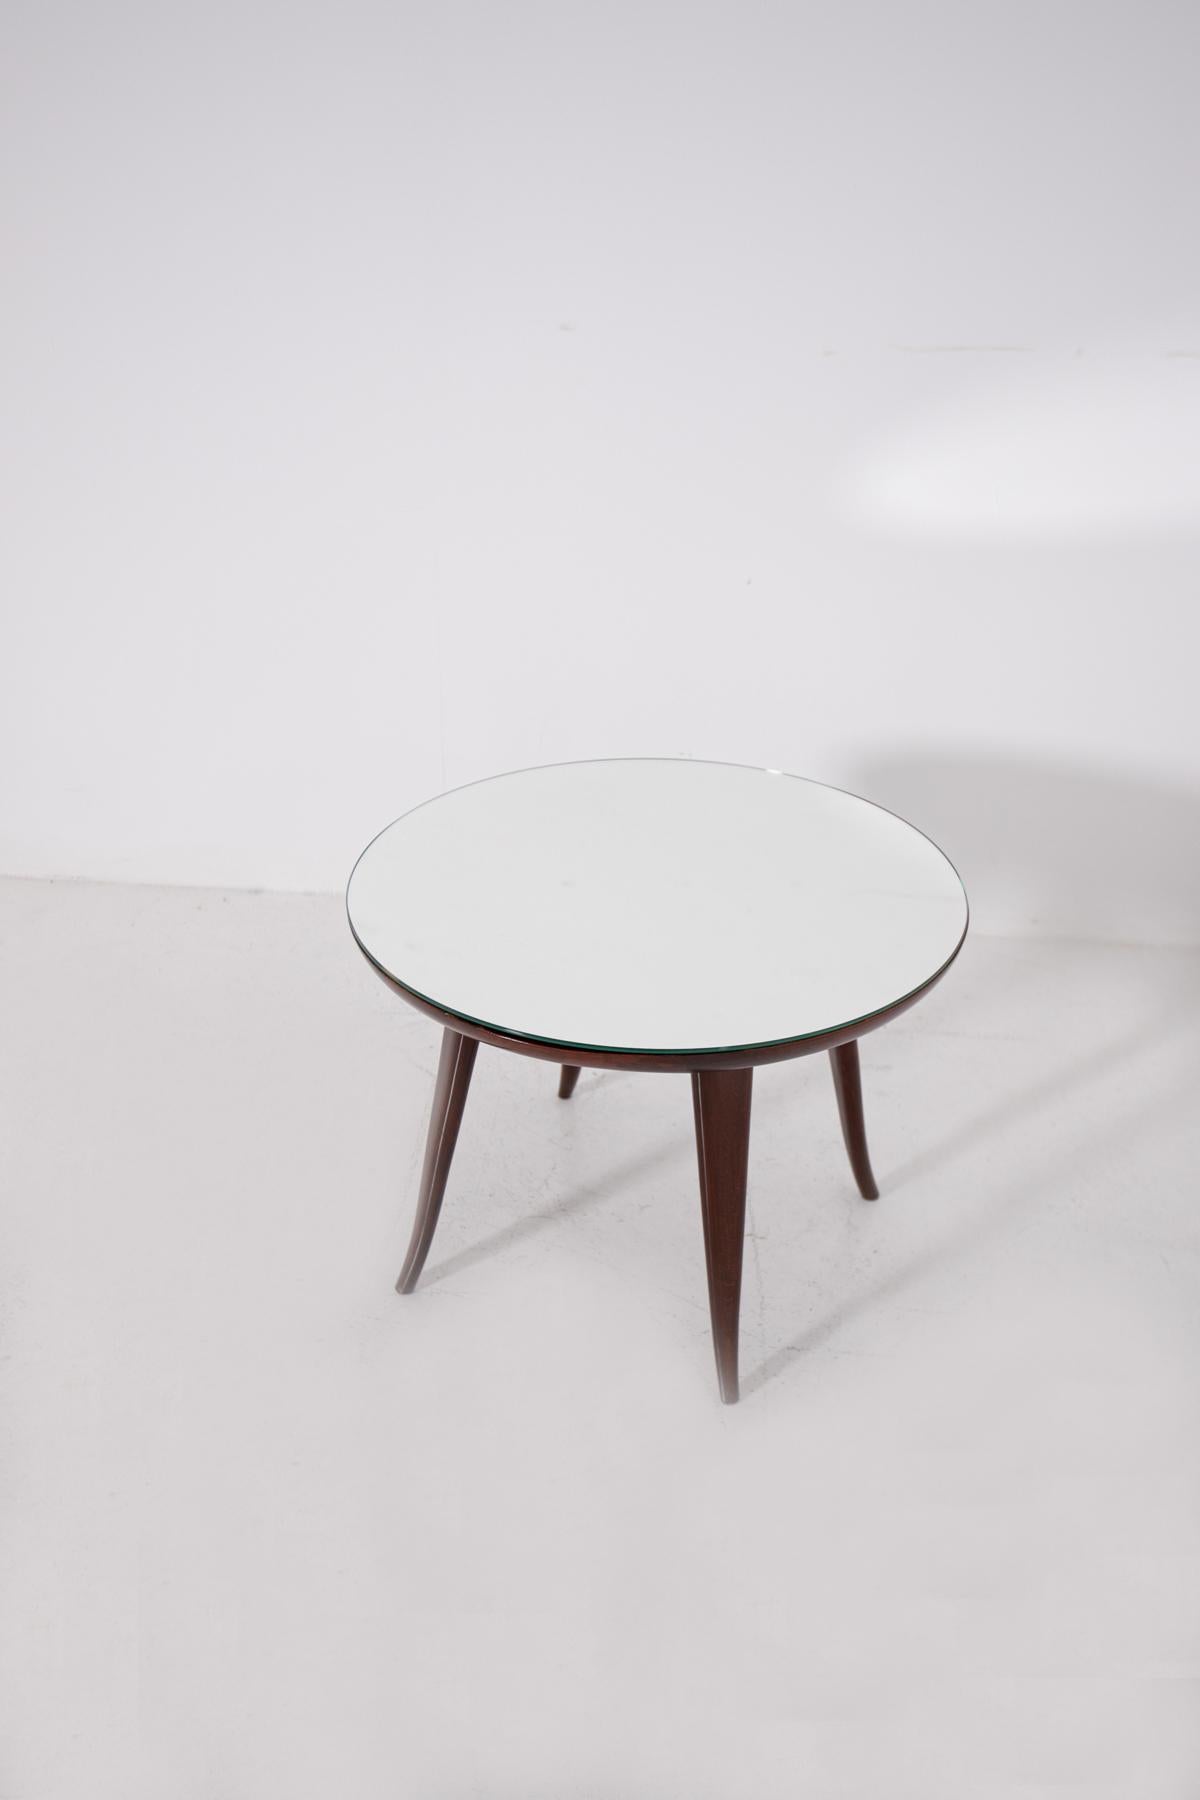 Mid-20th Century Italian Coffee Table by Pietro Chiesa in wood and Mirror, 1950s